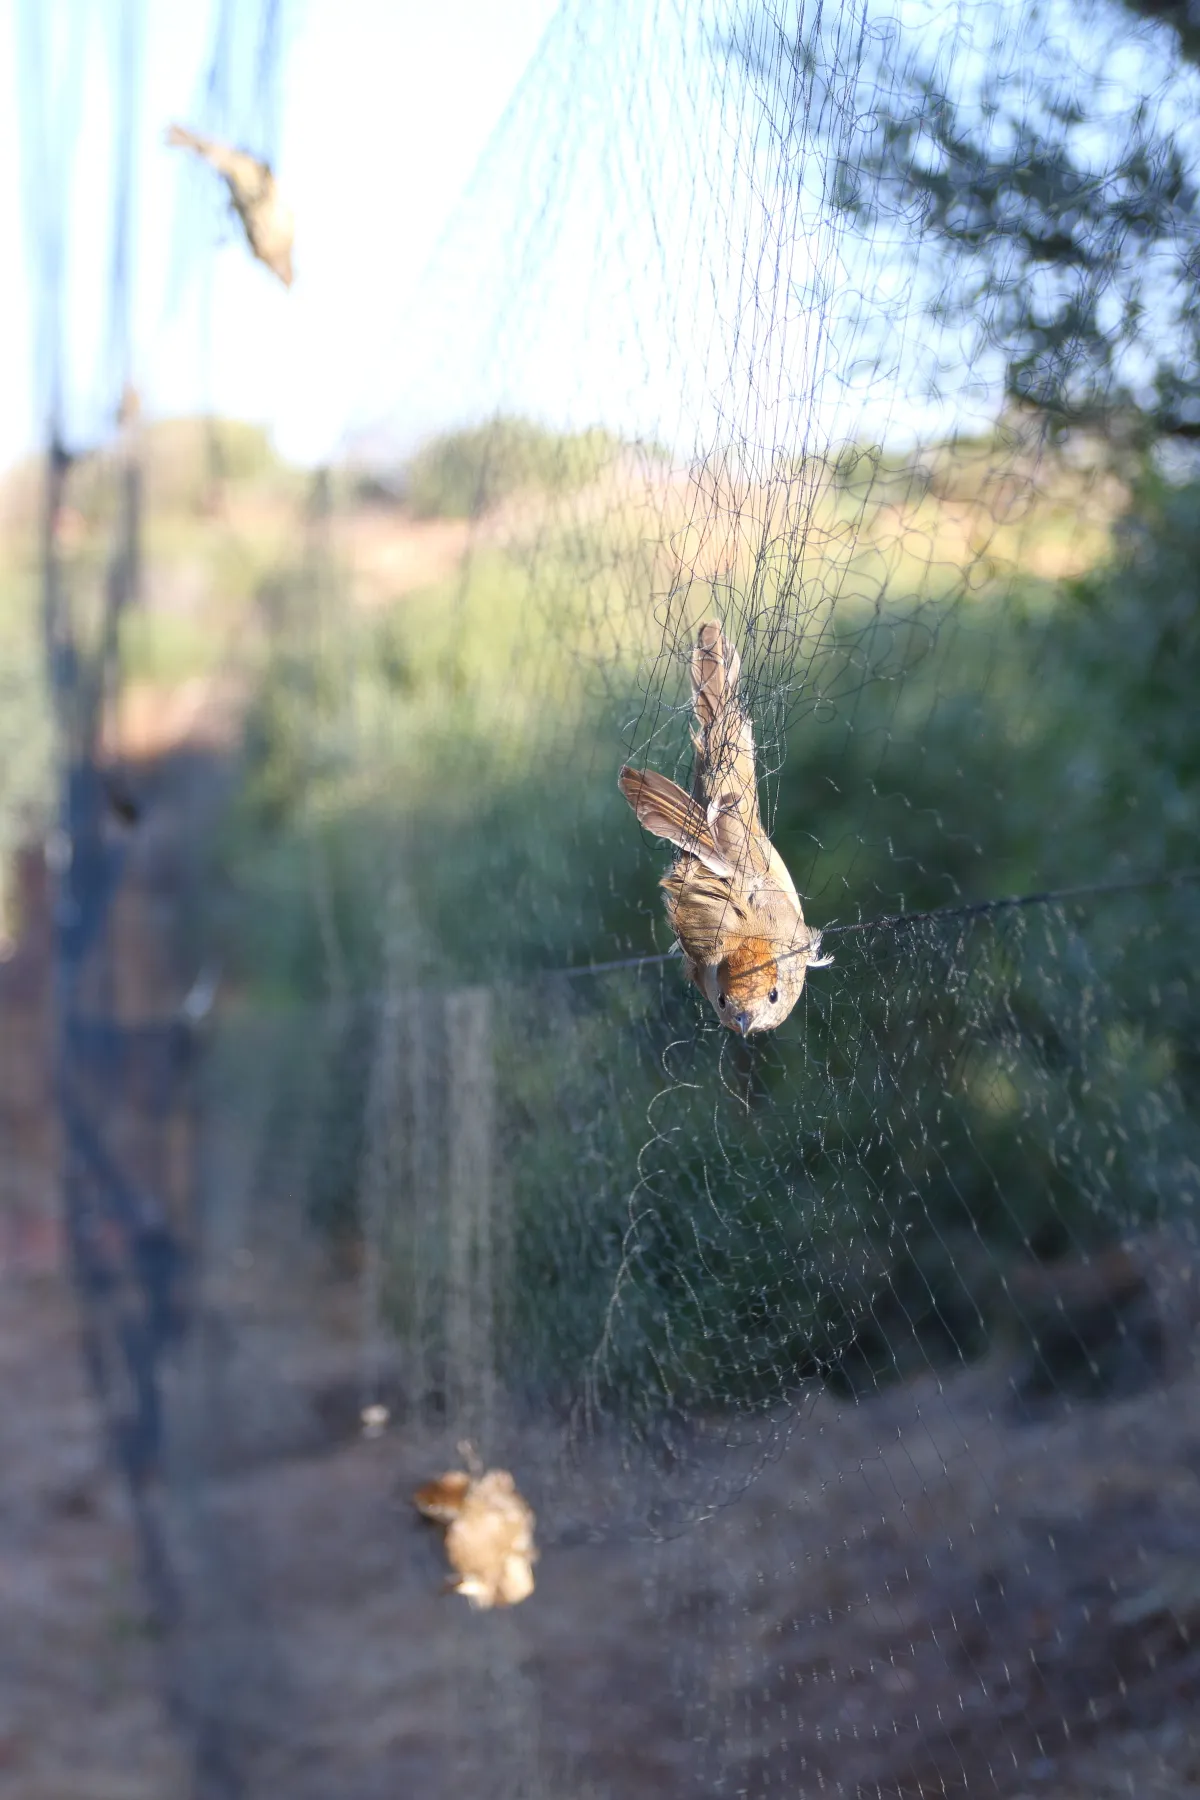 3 blackcaps are pictured stuck in a net hanging in the Cyprus countryside .